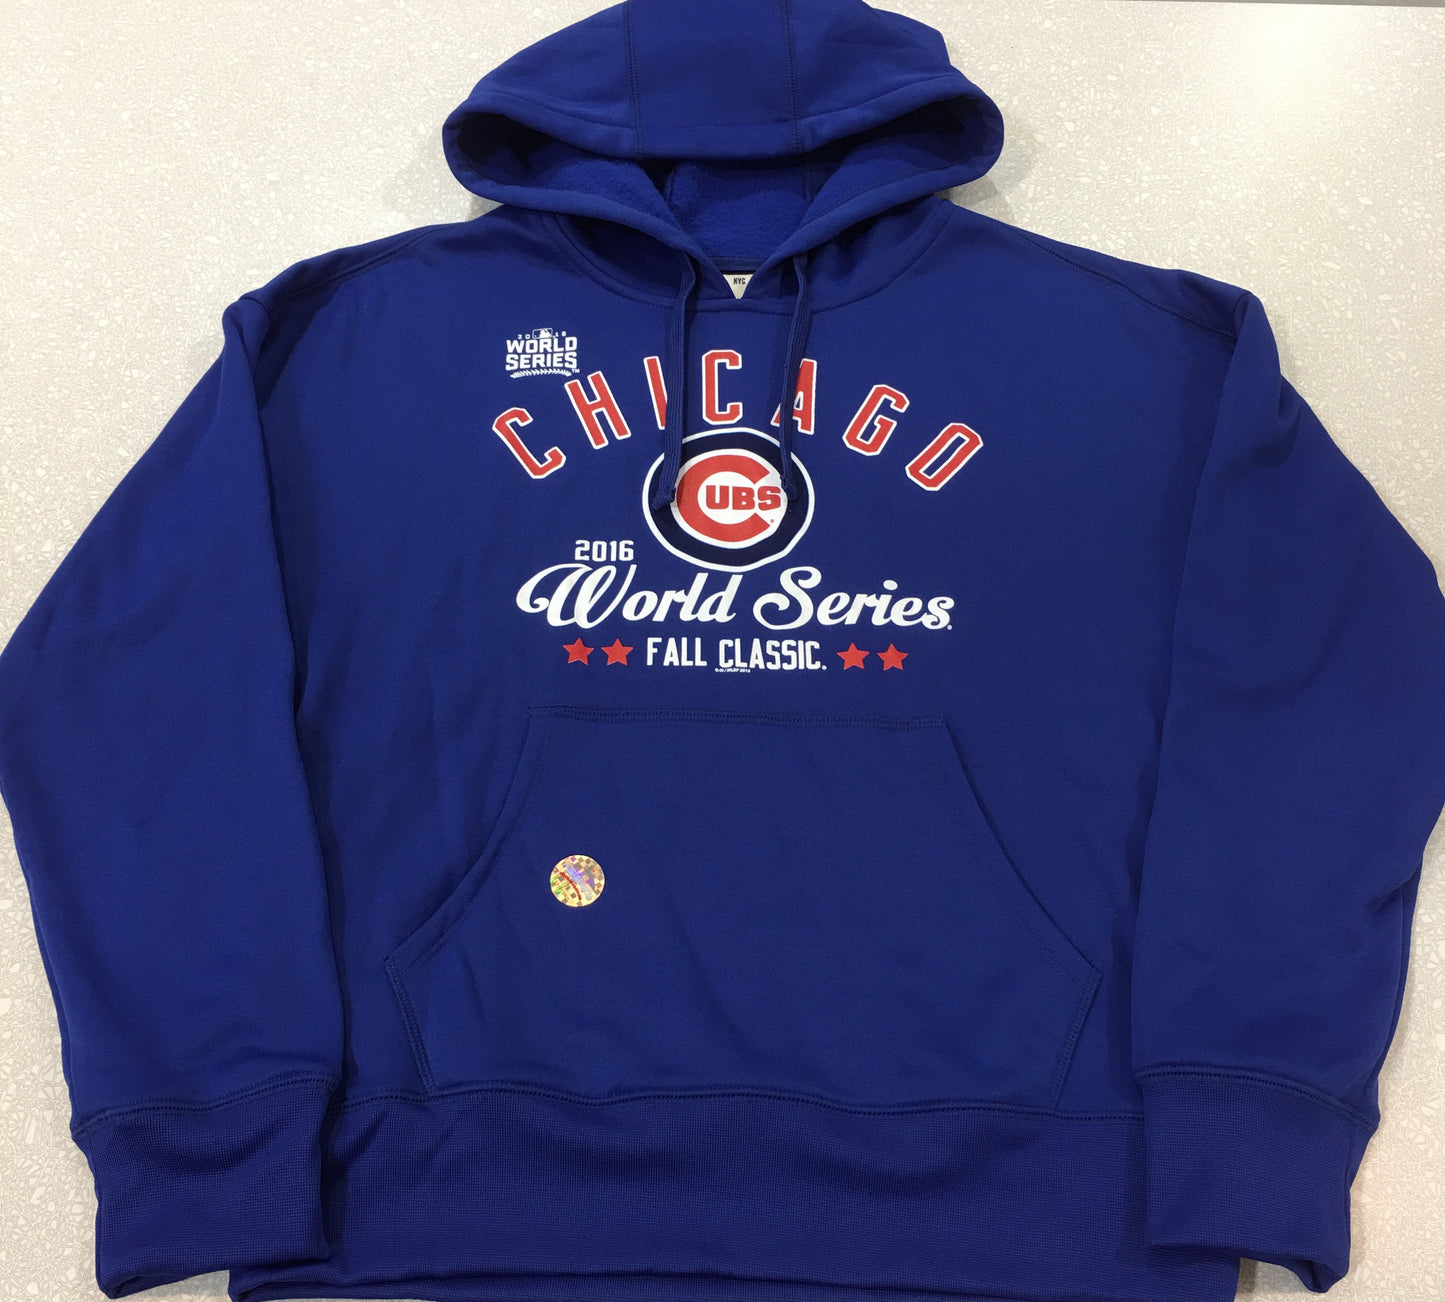 Women's Chicago Cubs 2016 World Series "Fall Classic" Pullover Hoodie